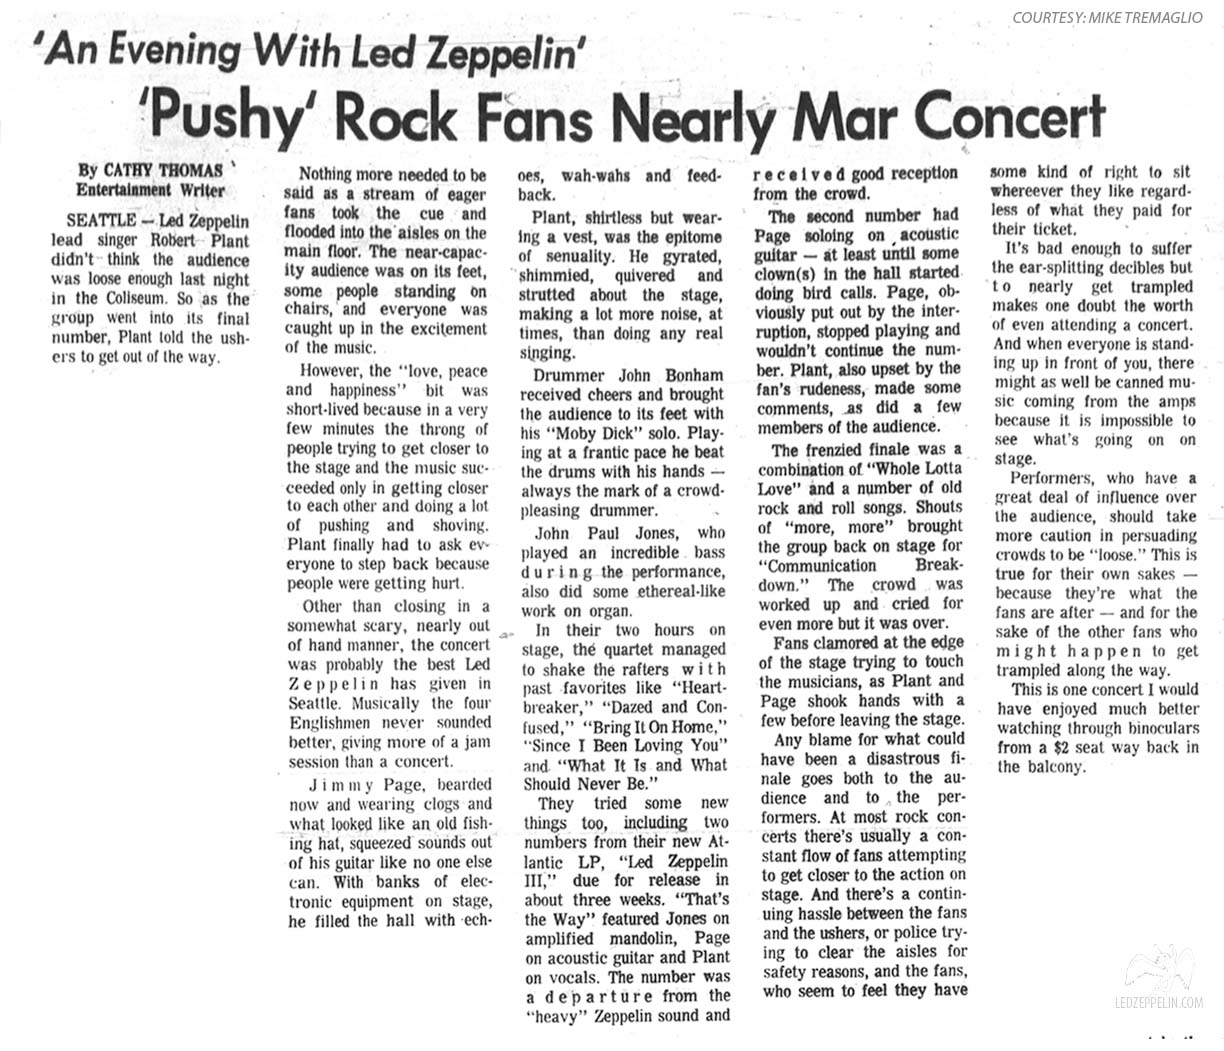 Seattle - September 1970 review